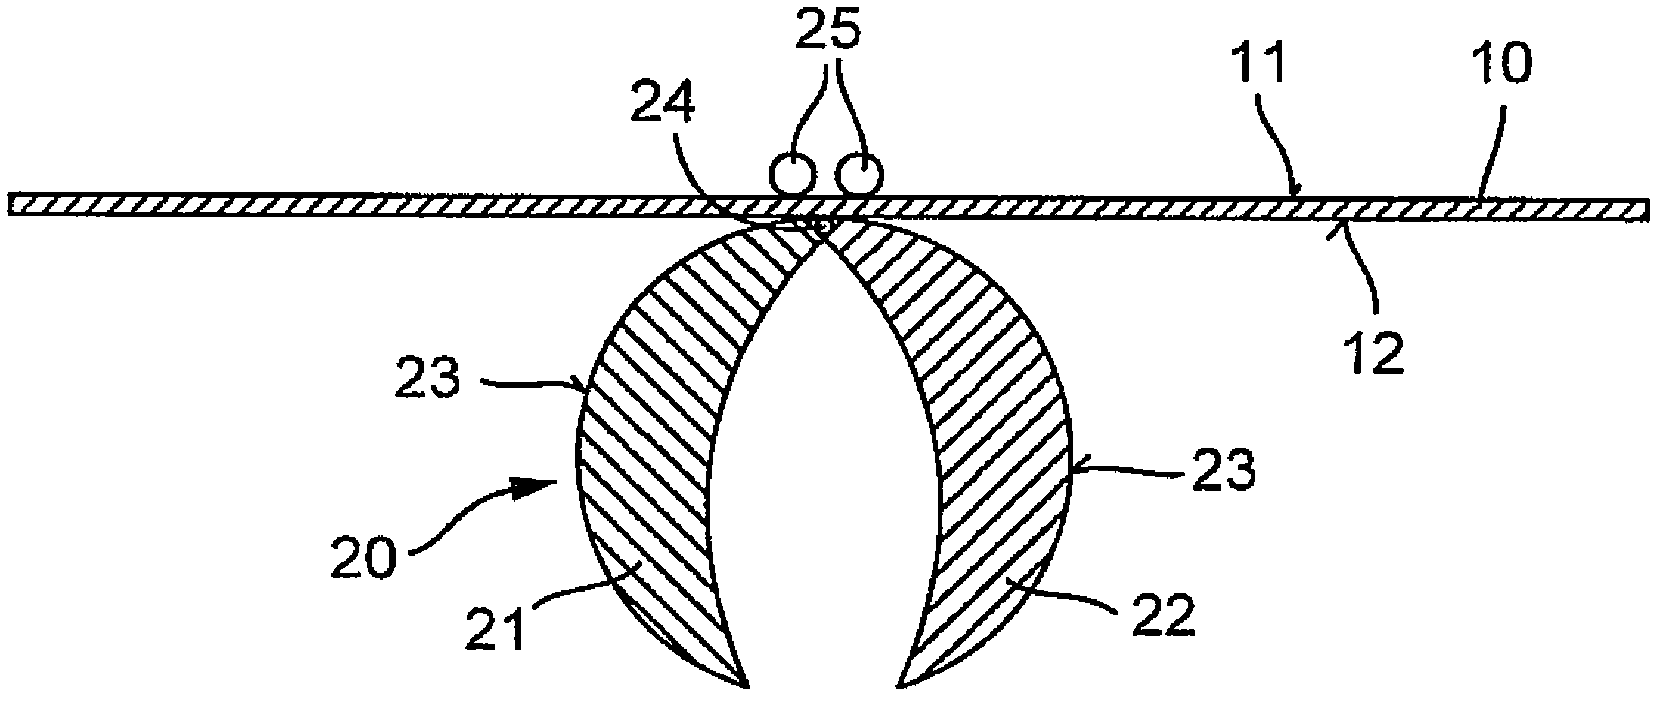 Curved glass or glass ceramic moulded part and method for producing same